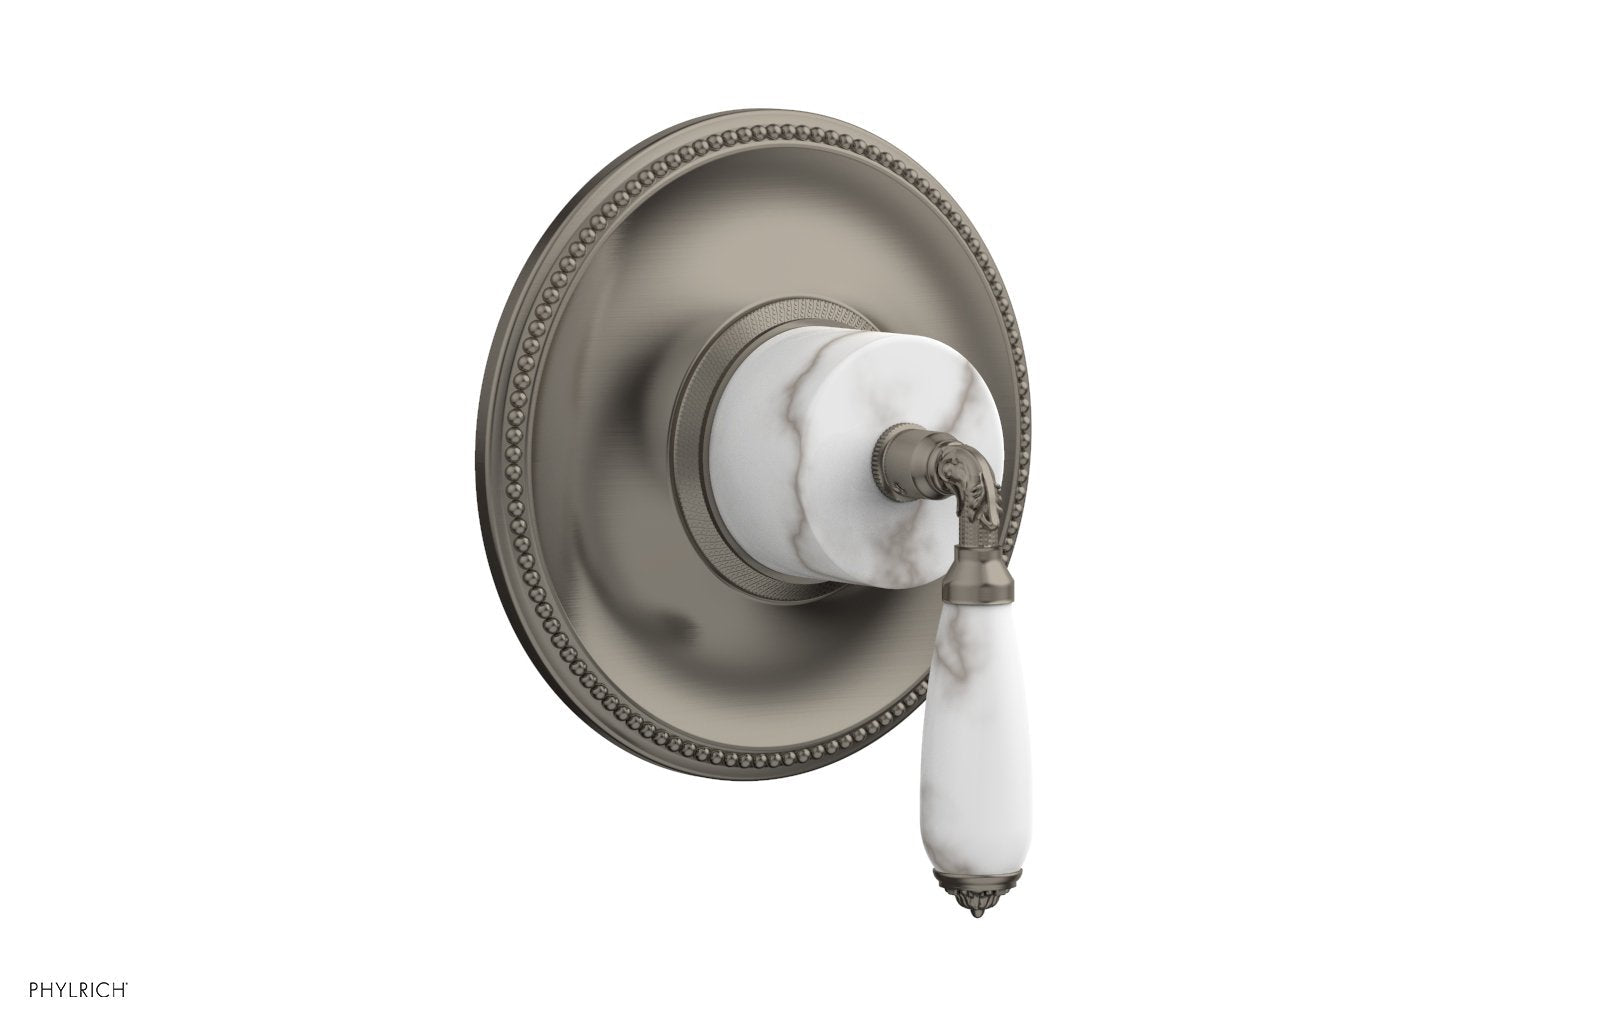 Phylrich VALENCIA Thermostatic Shower Trim, White Marble Lever Handle